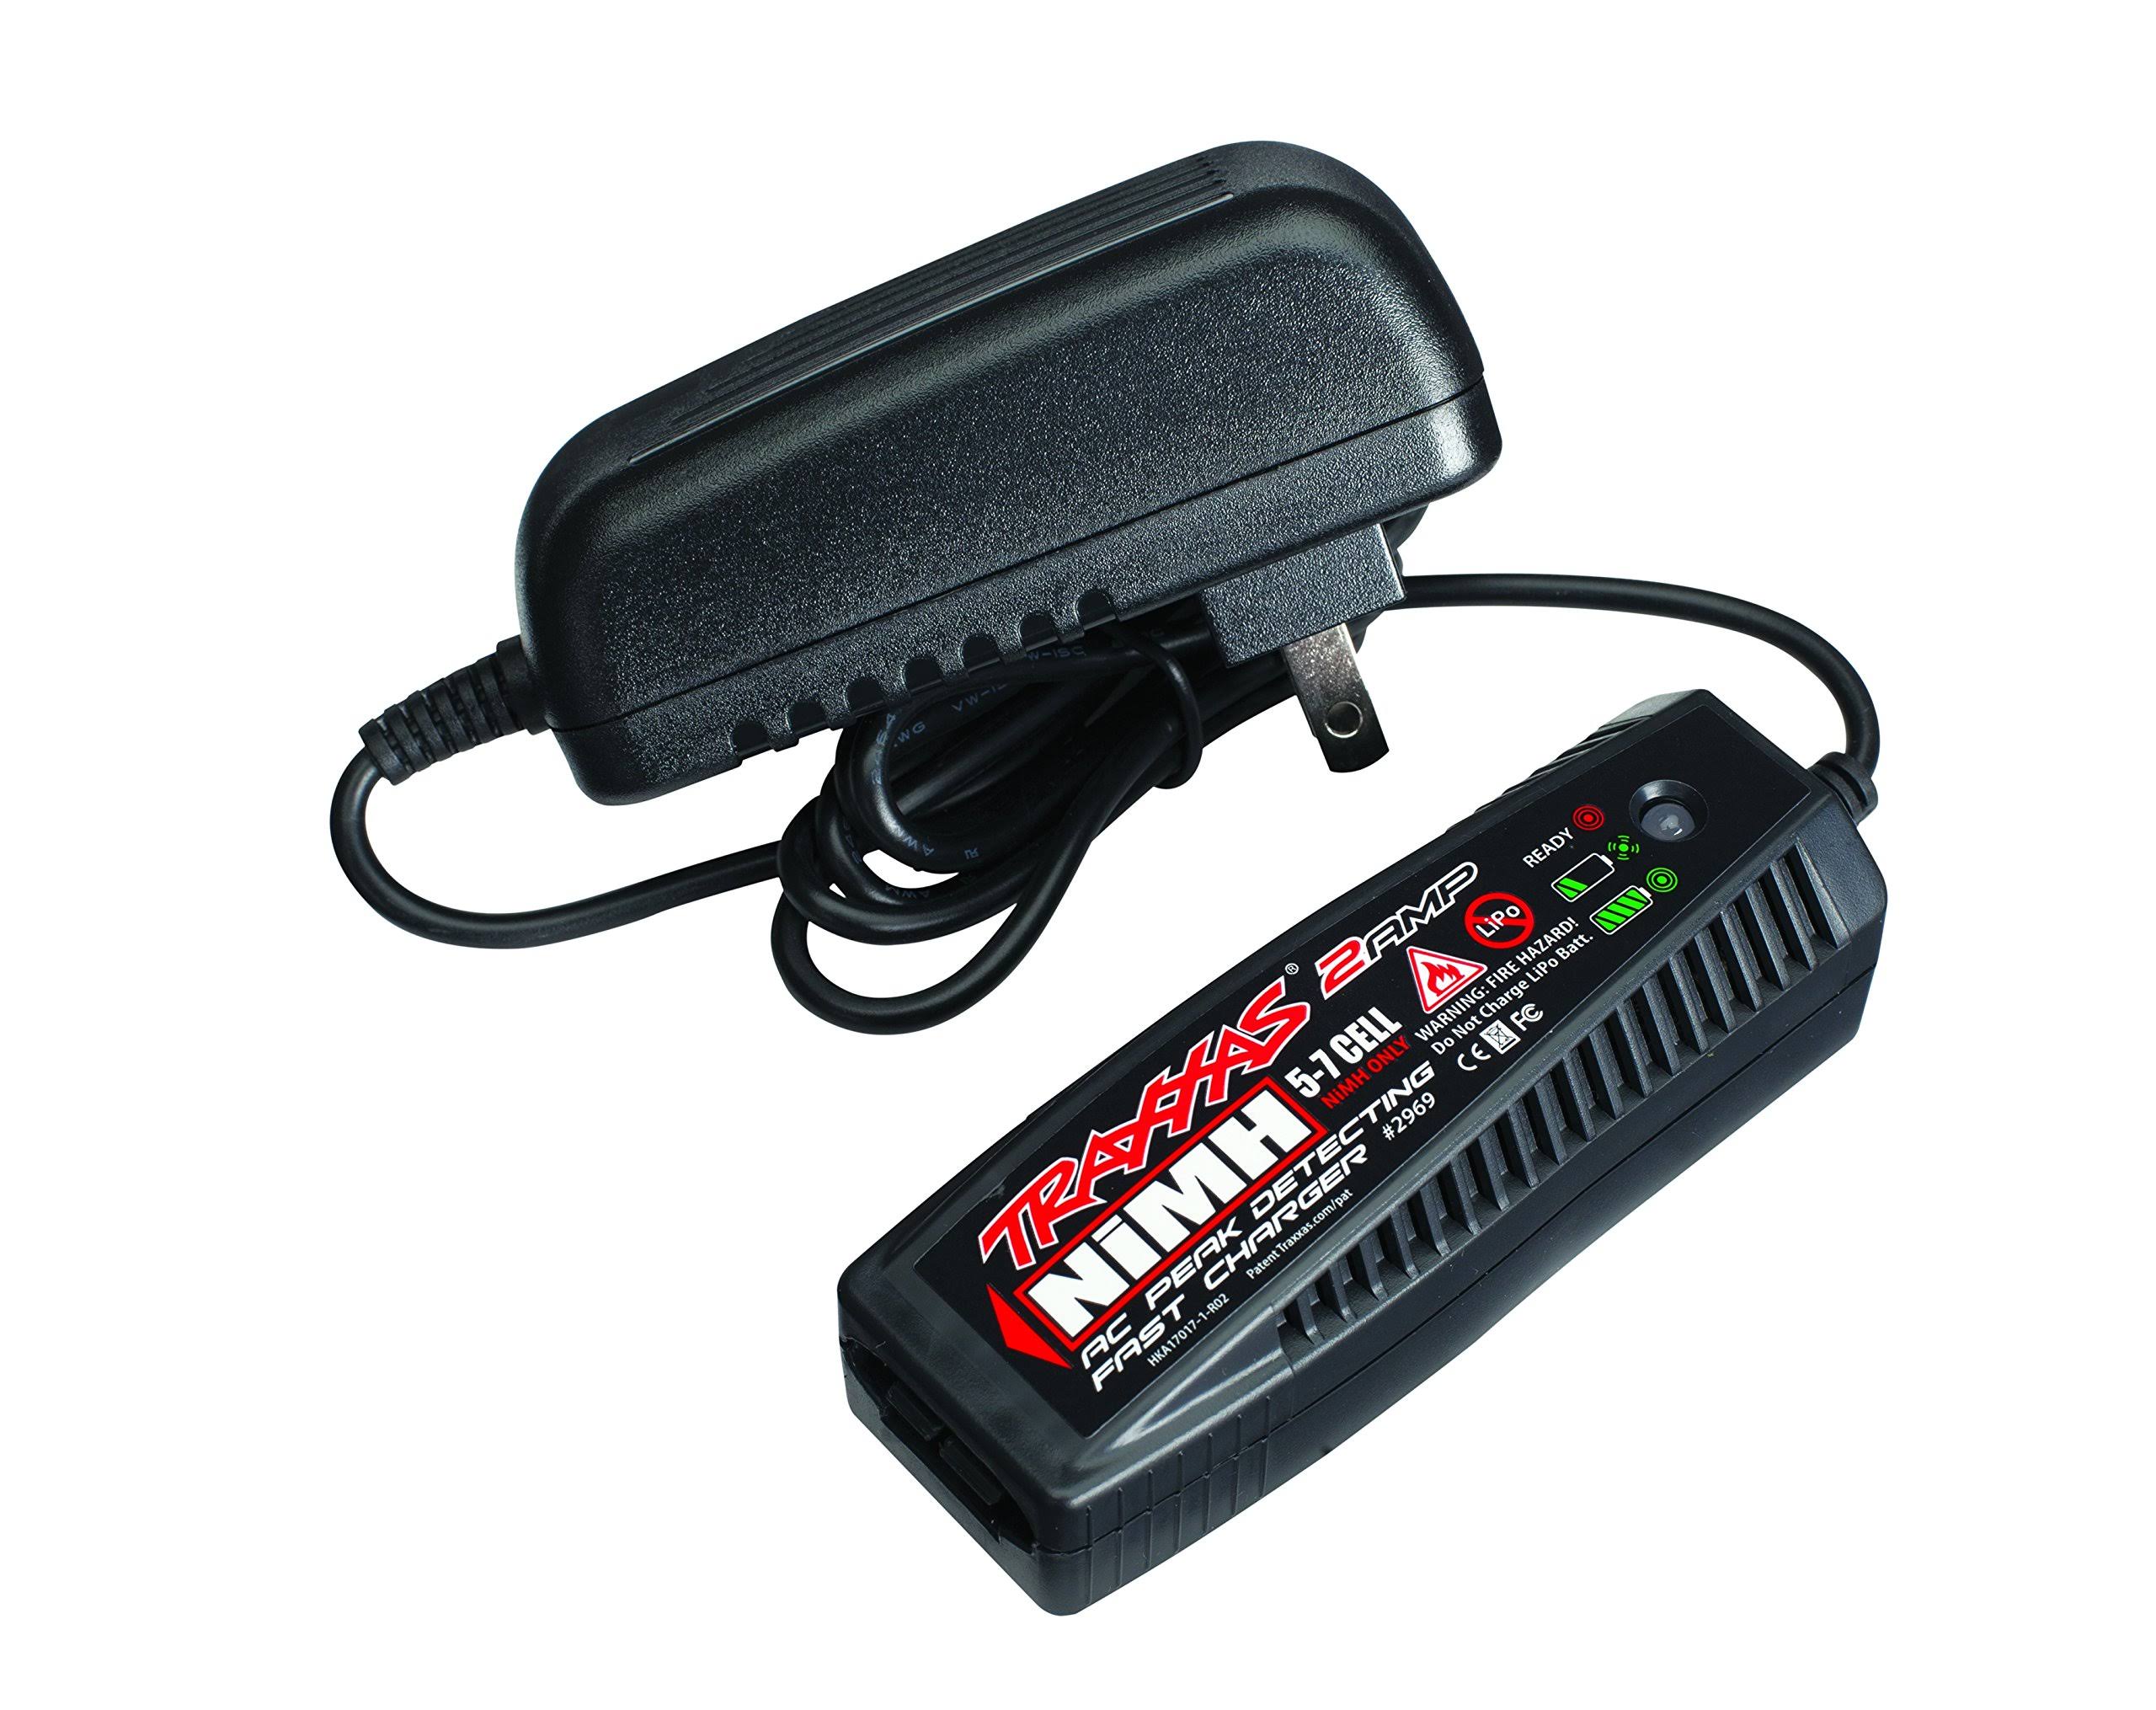 Traxxas 2-Amp AC Peak-Detecting 5-7 Cell NiMH Battery Fast Charger (2969)